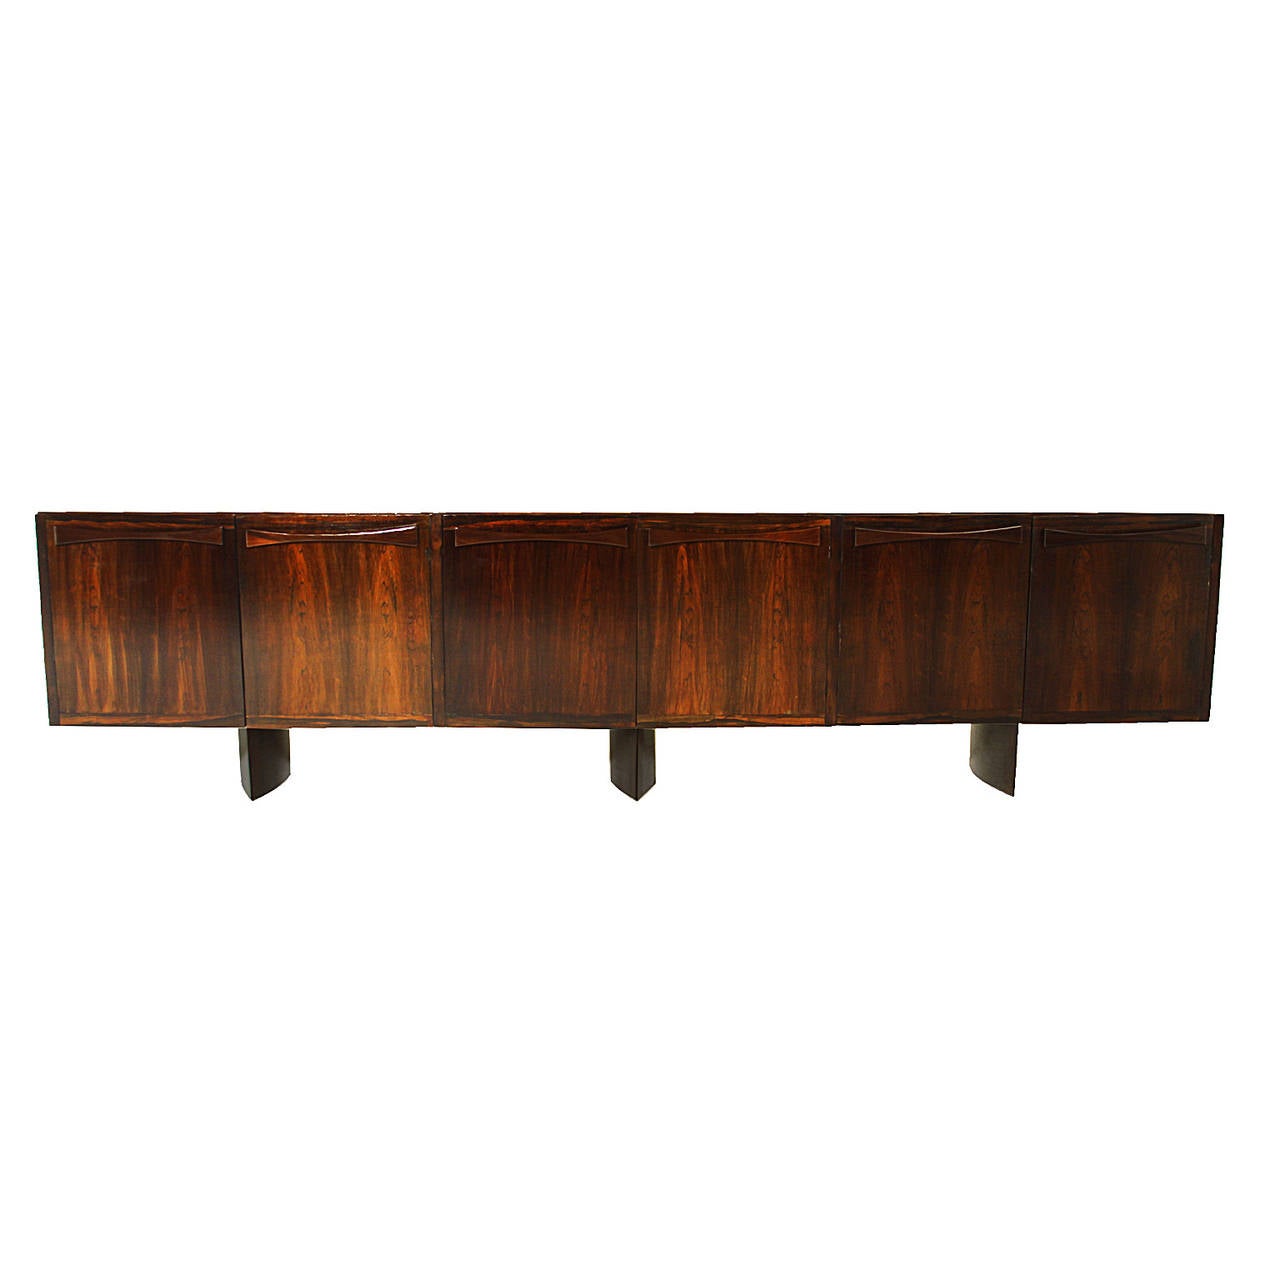 A beautiful rosewood credenza attributed to Jorge Zalszupin. The handles are shaped like bow ties and the feet are eyeball base shaped. These features add a sculptural element to the design.

Many pieces are stored in our warehouse, so please